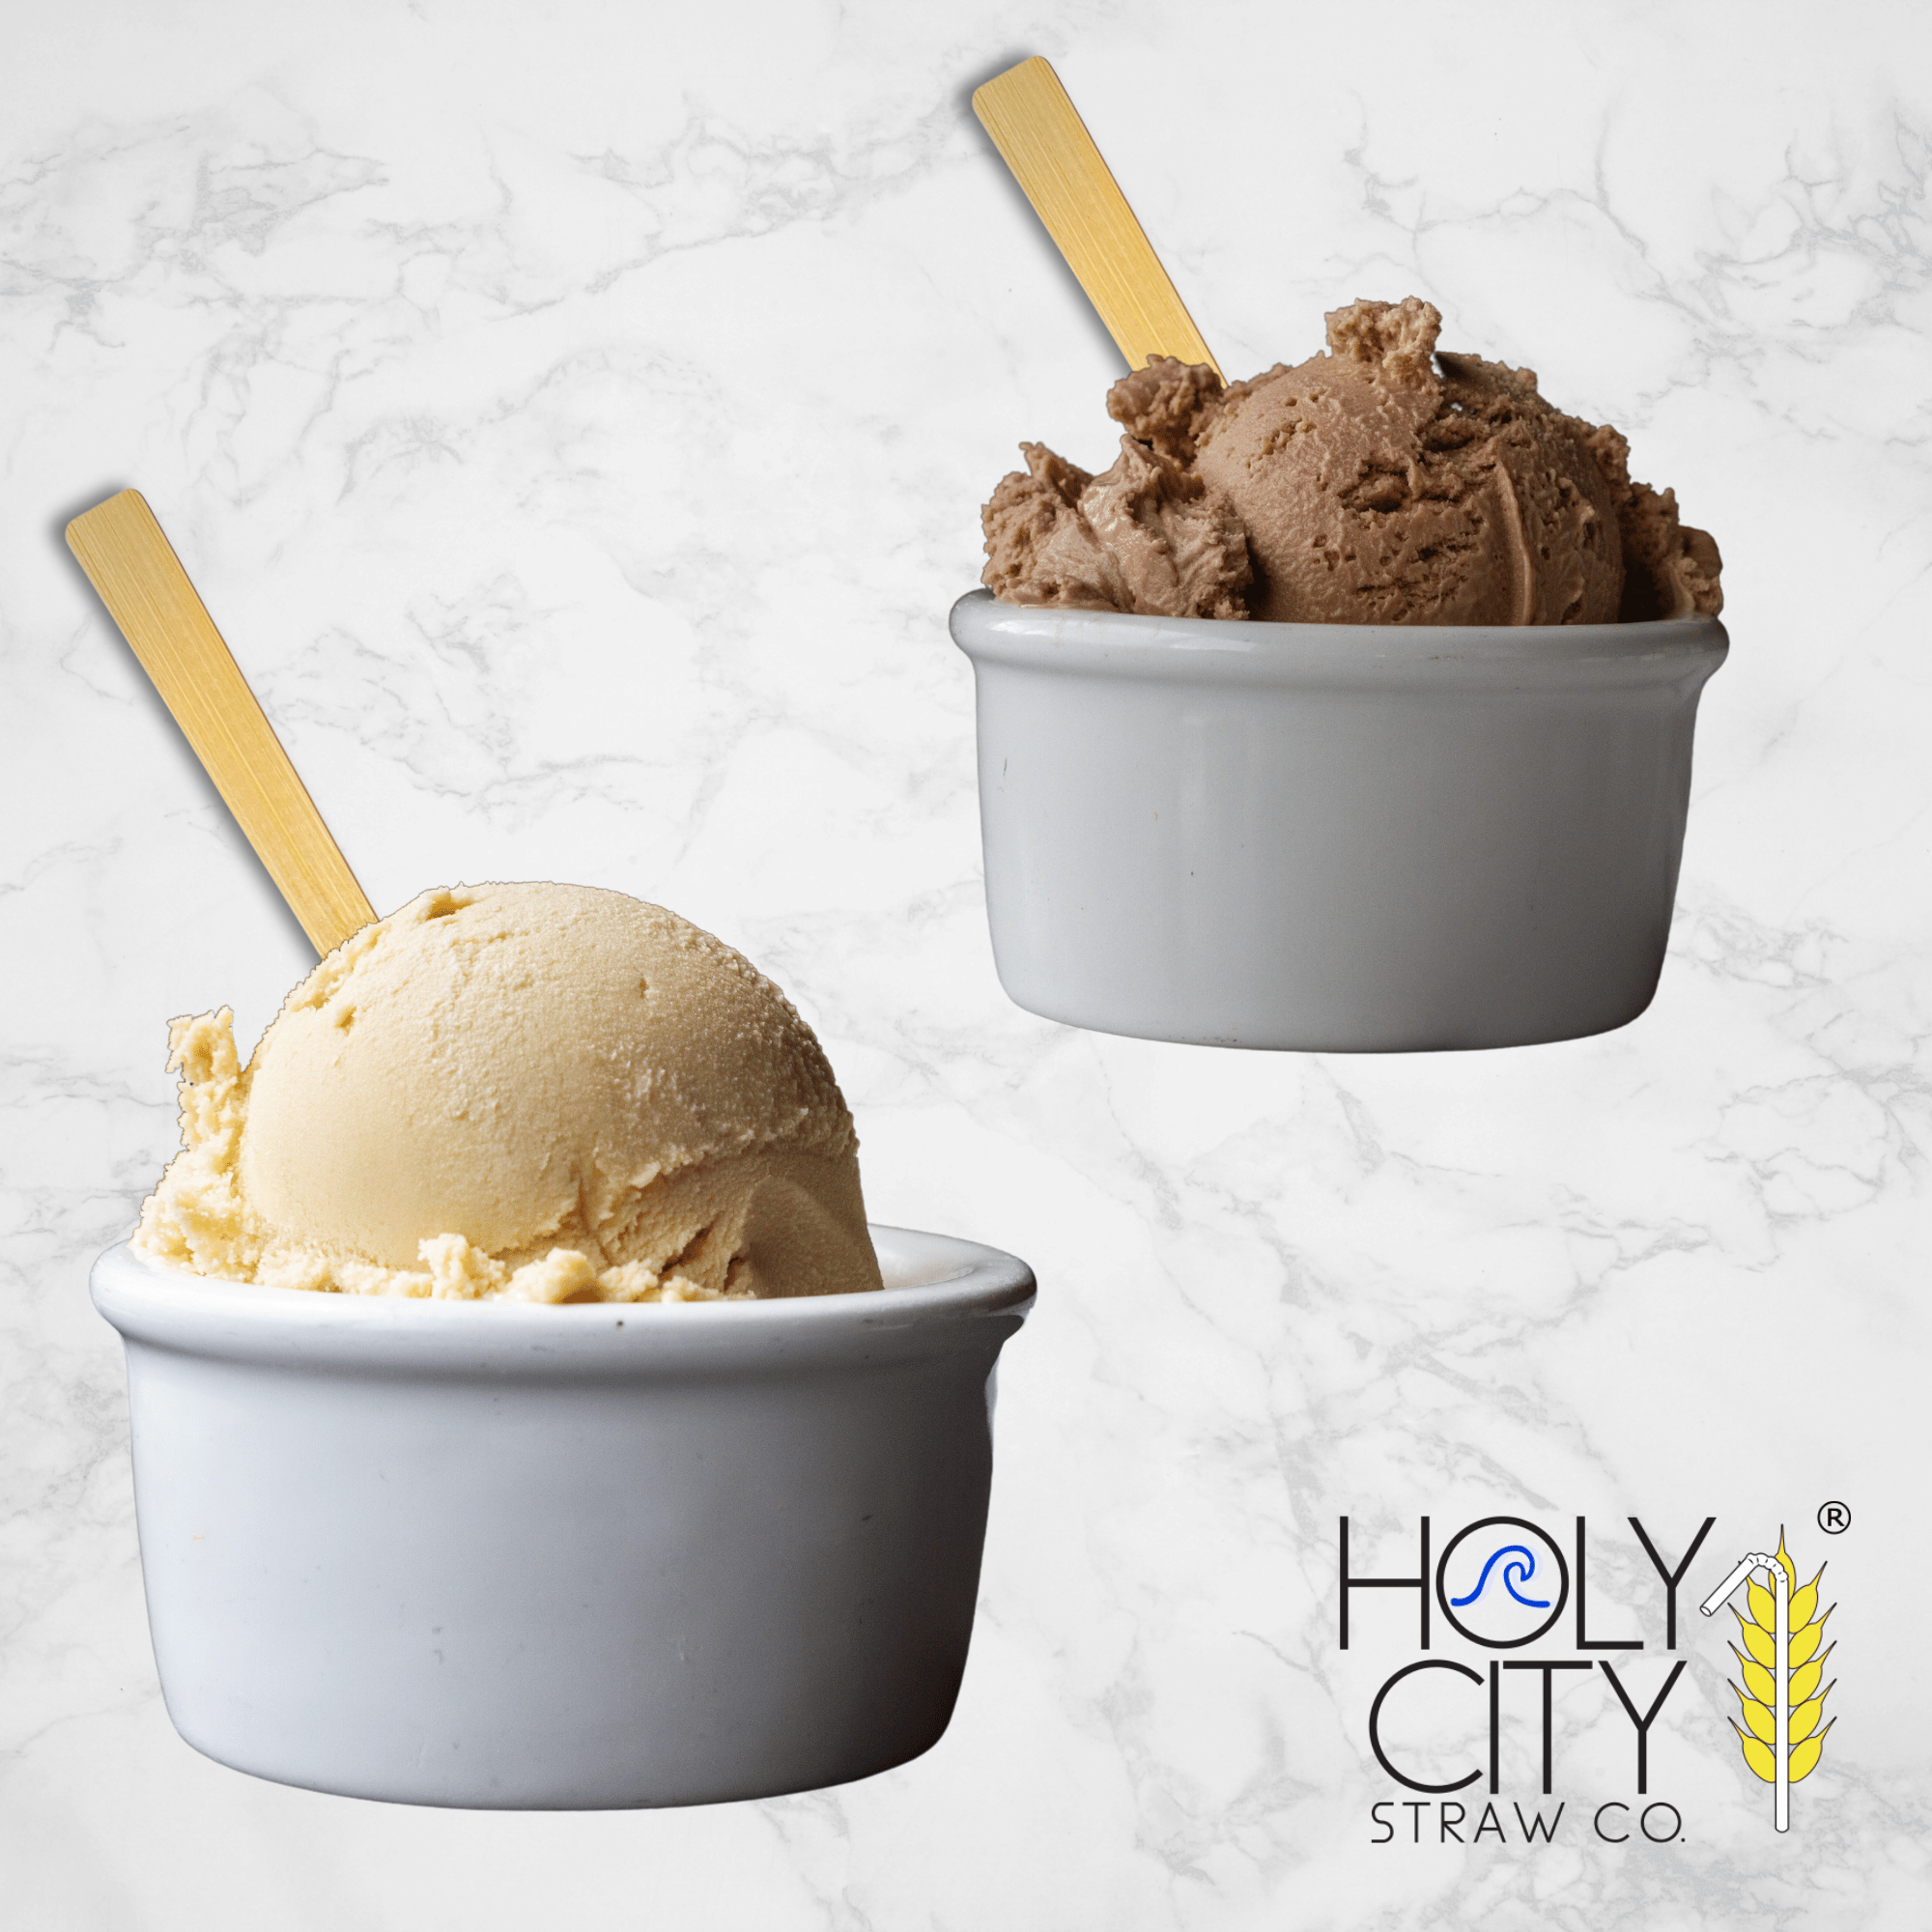 Two gray ceramic bowls on a marble background, each containing a scoop of ice cream with a bamboo taster spoon from Holy City Straw Co. The front bowl has a creamy beige scoop, possibly vanilla, while the bowl in the back contains chocolate ice cream. The Holy City Straw Co. logo is prominently displayed at the bottom right